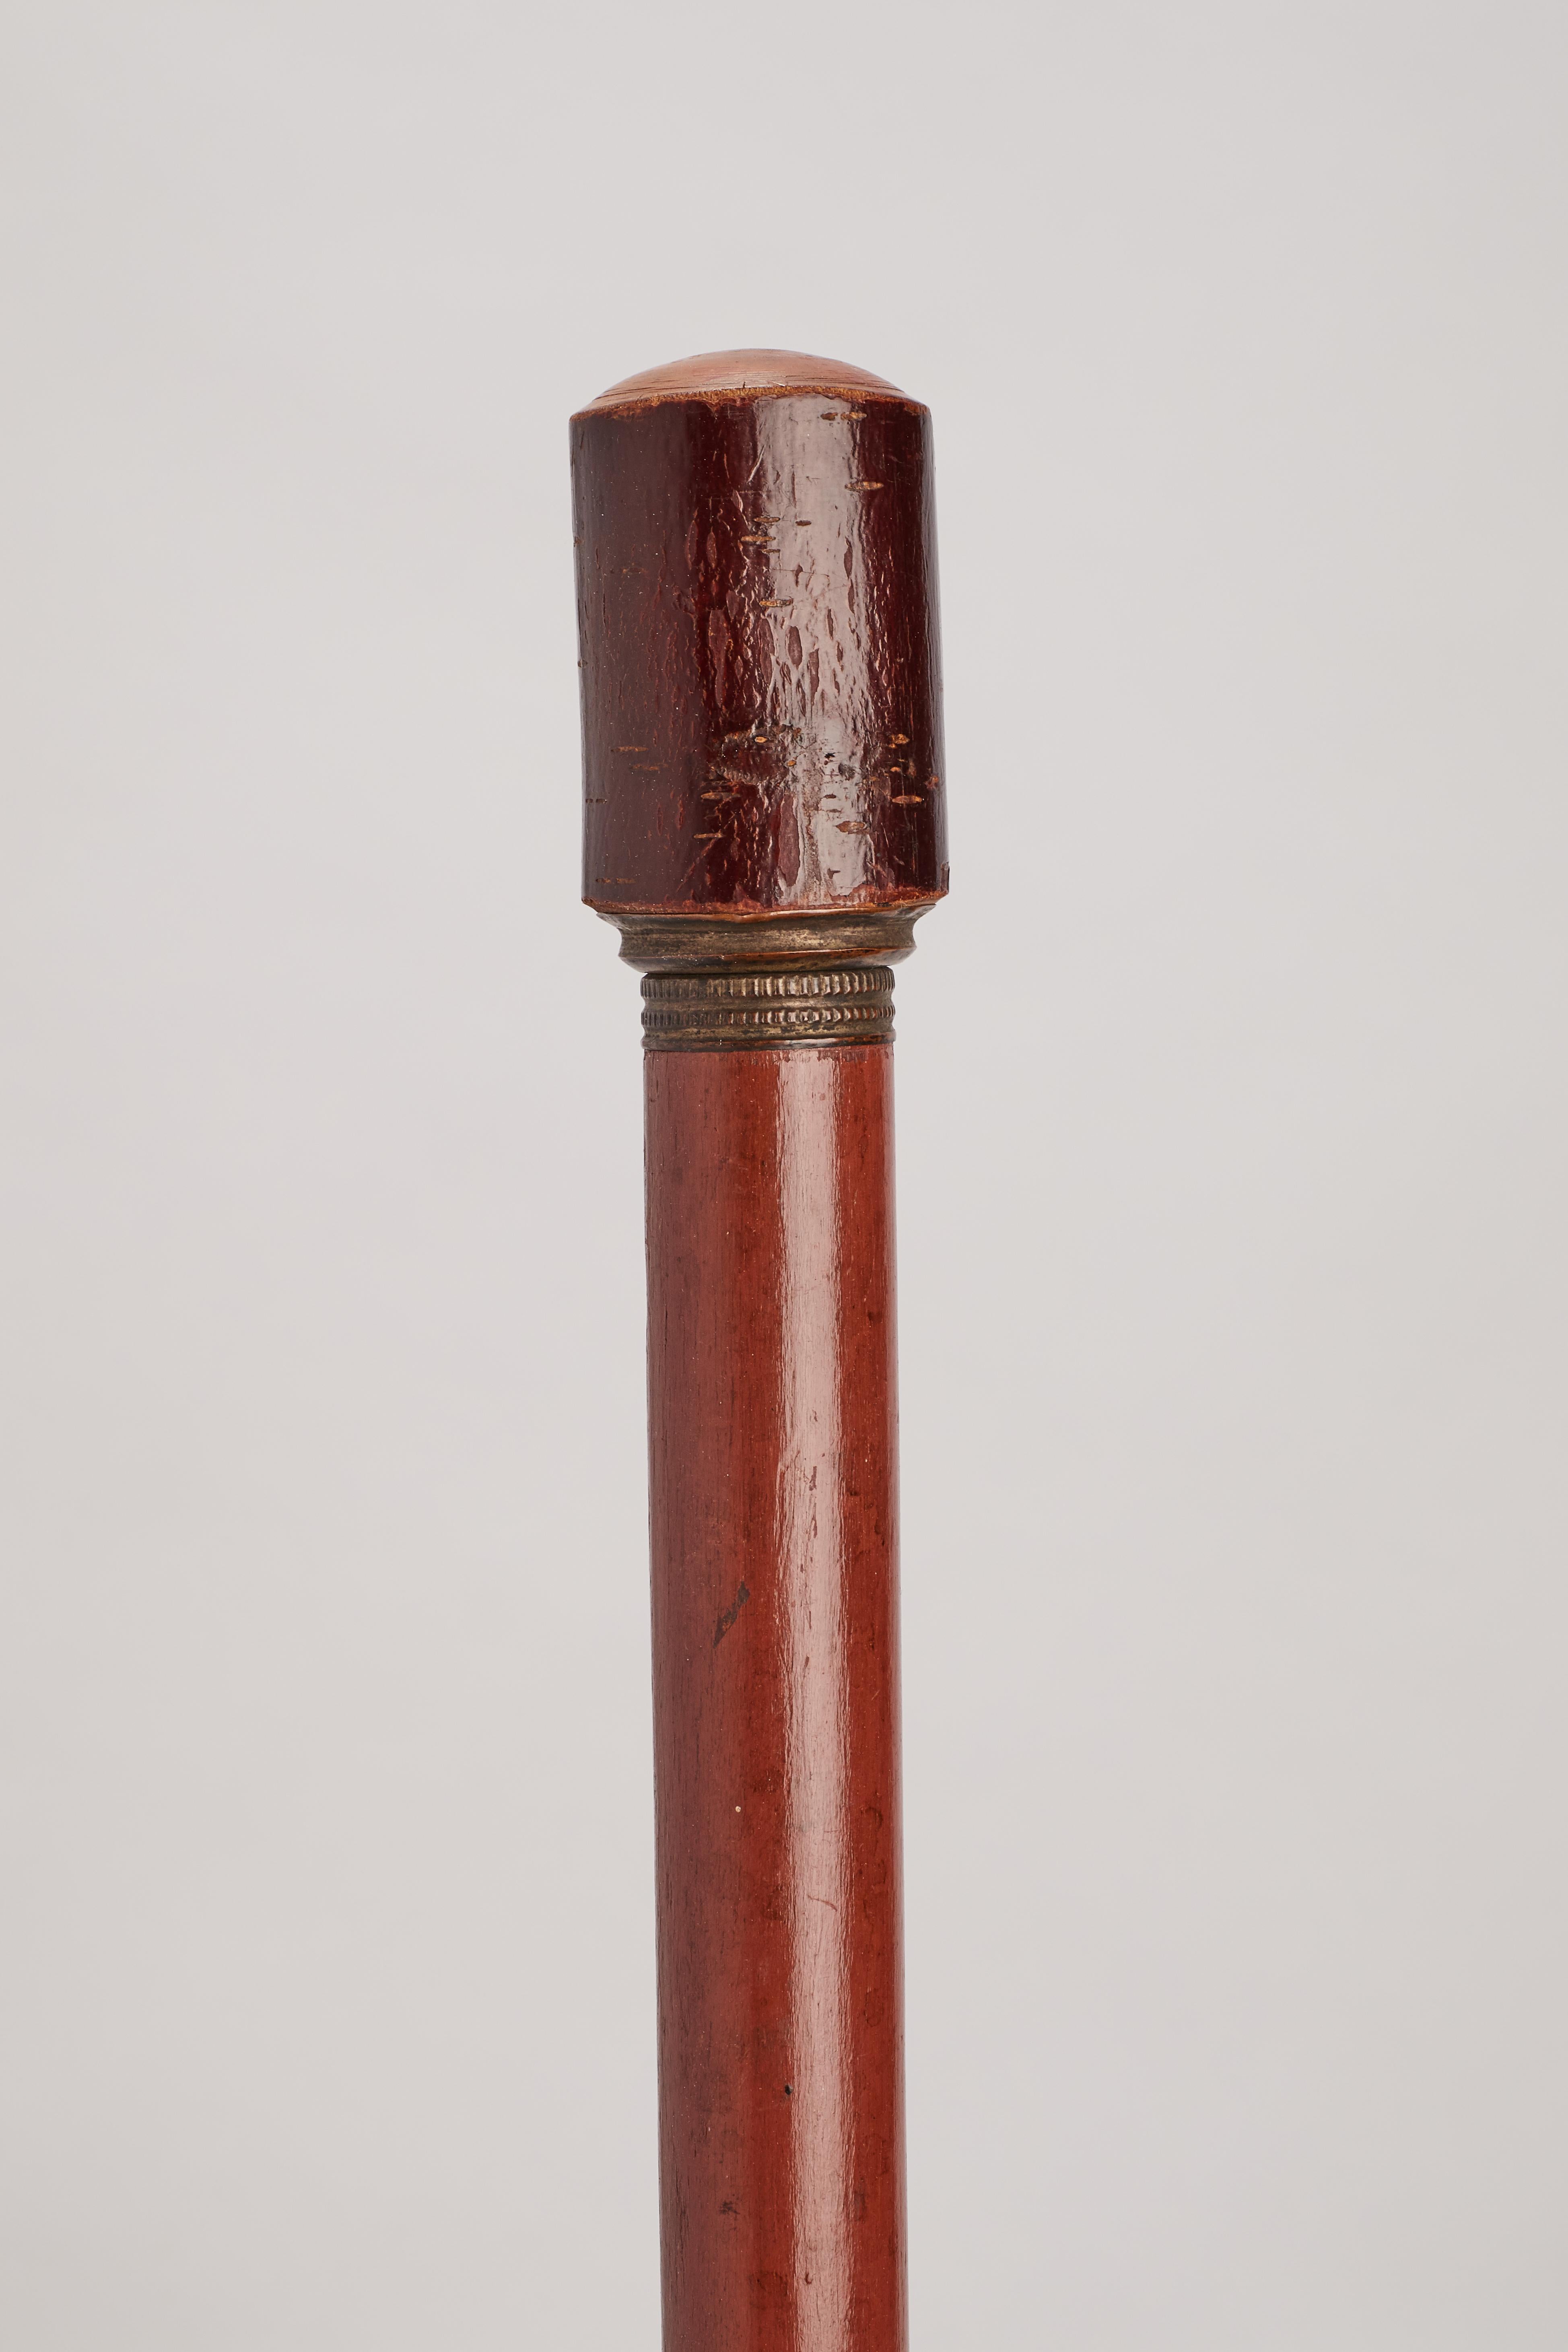 Gadget-System: System walking stick with the function of a pipe. Rattan wood barrel, birch wood knob with bark, metal tip. By unscrewing the knob, the bowl of the pipe, the wooden, metal and amber mouthpiece comes out. France early 20th century.